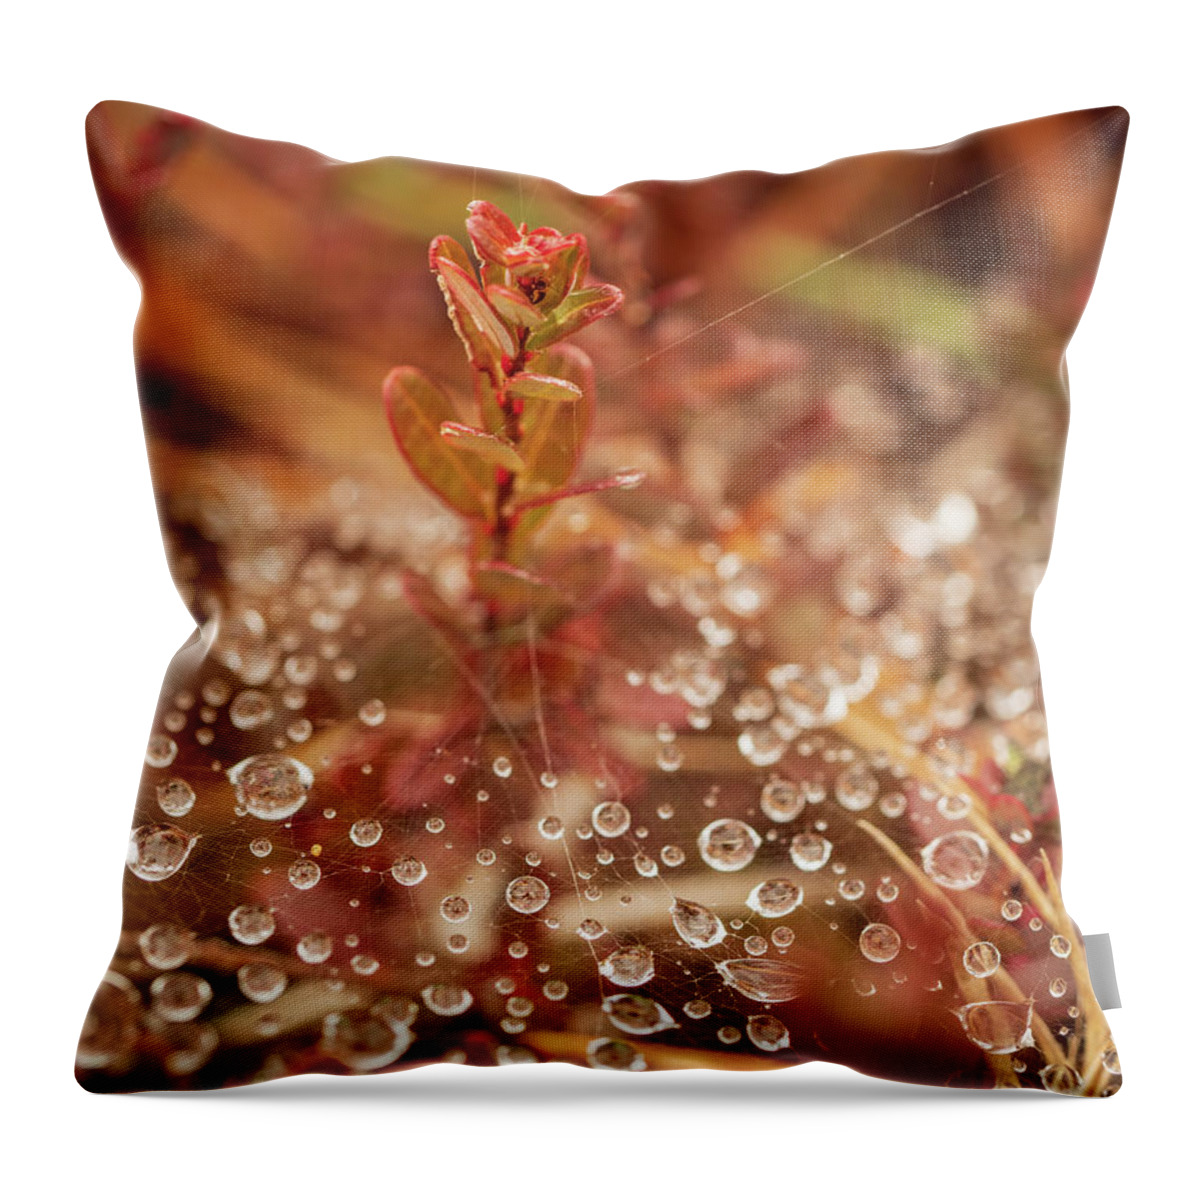 Cranberry Throw Pillow featuring the photograph Cranberry Peaking From A Spider Web by Kristia Adams